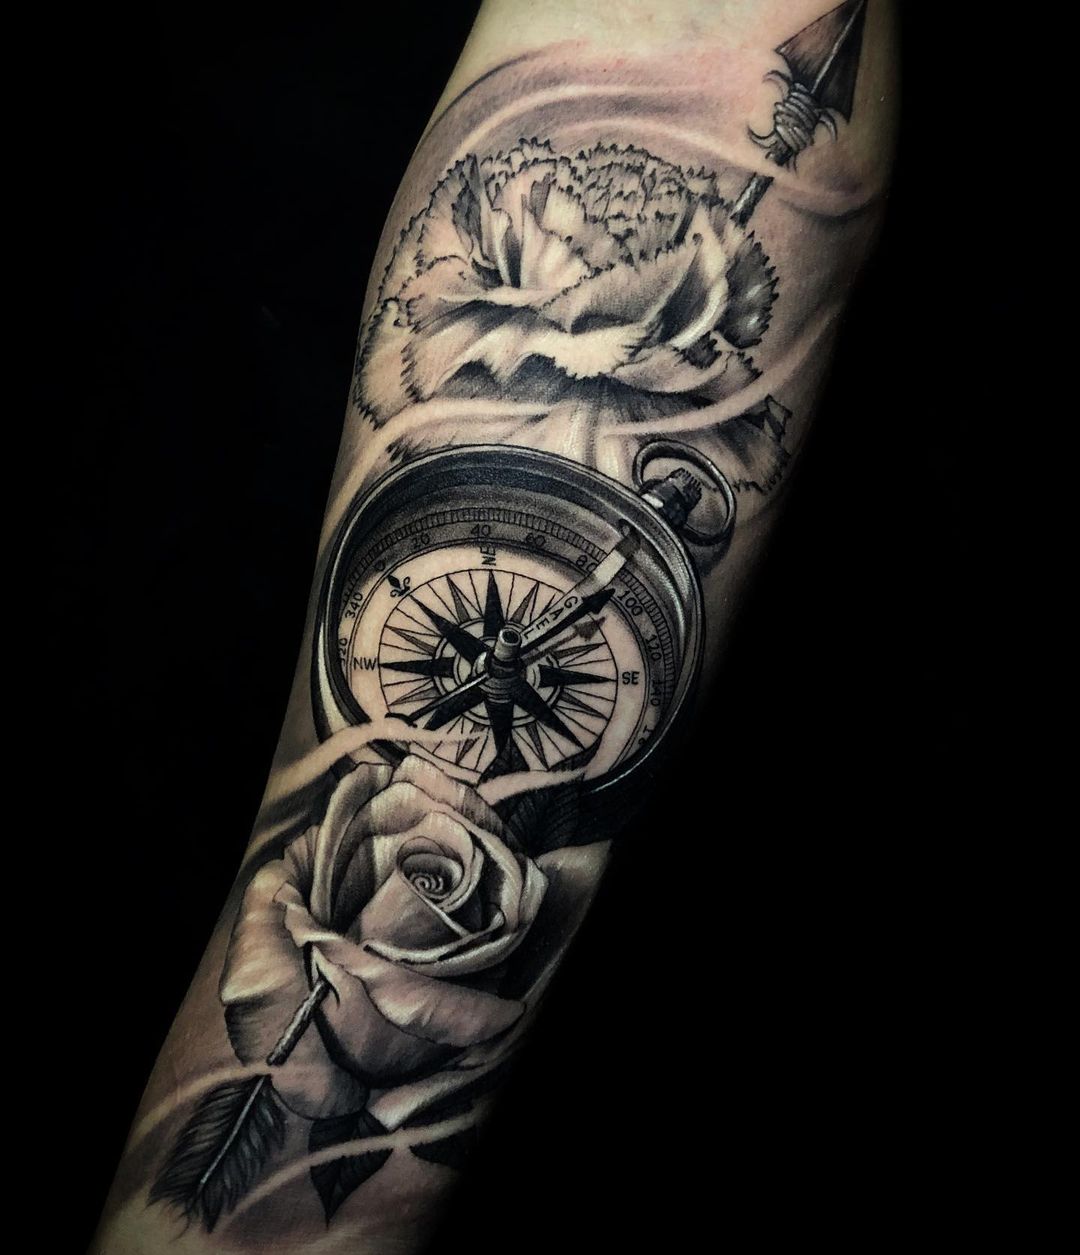 Compass Tattoos For Navigating Life's Ups and Downs